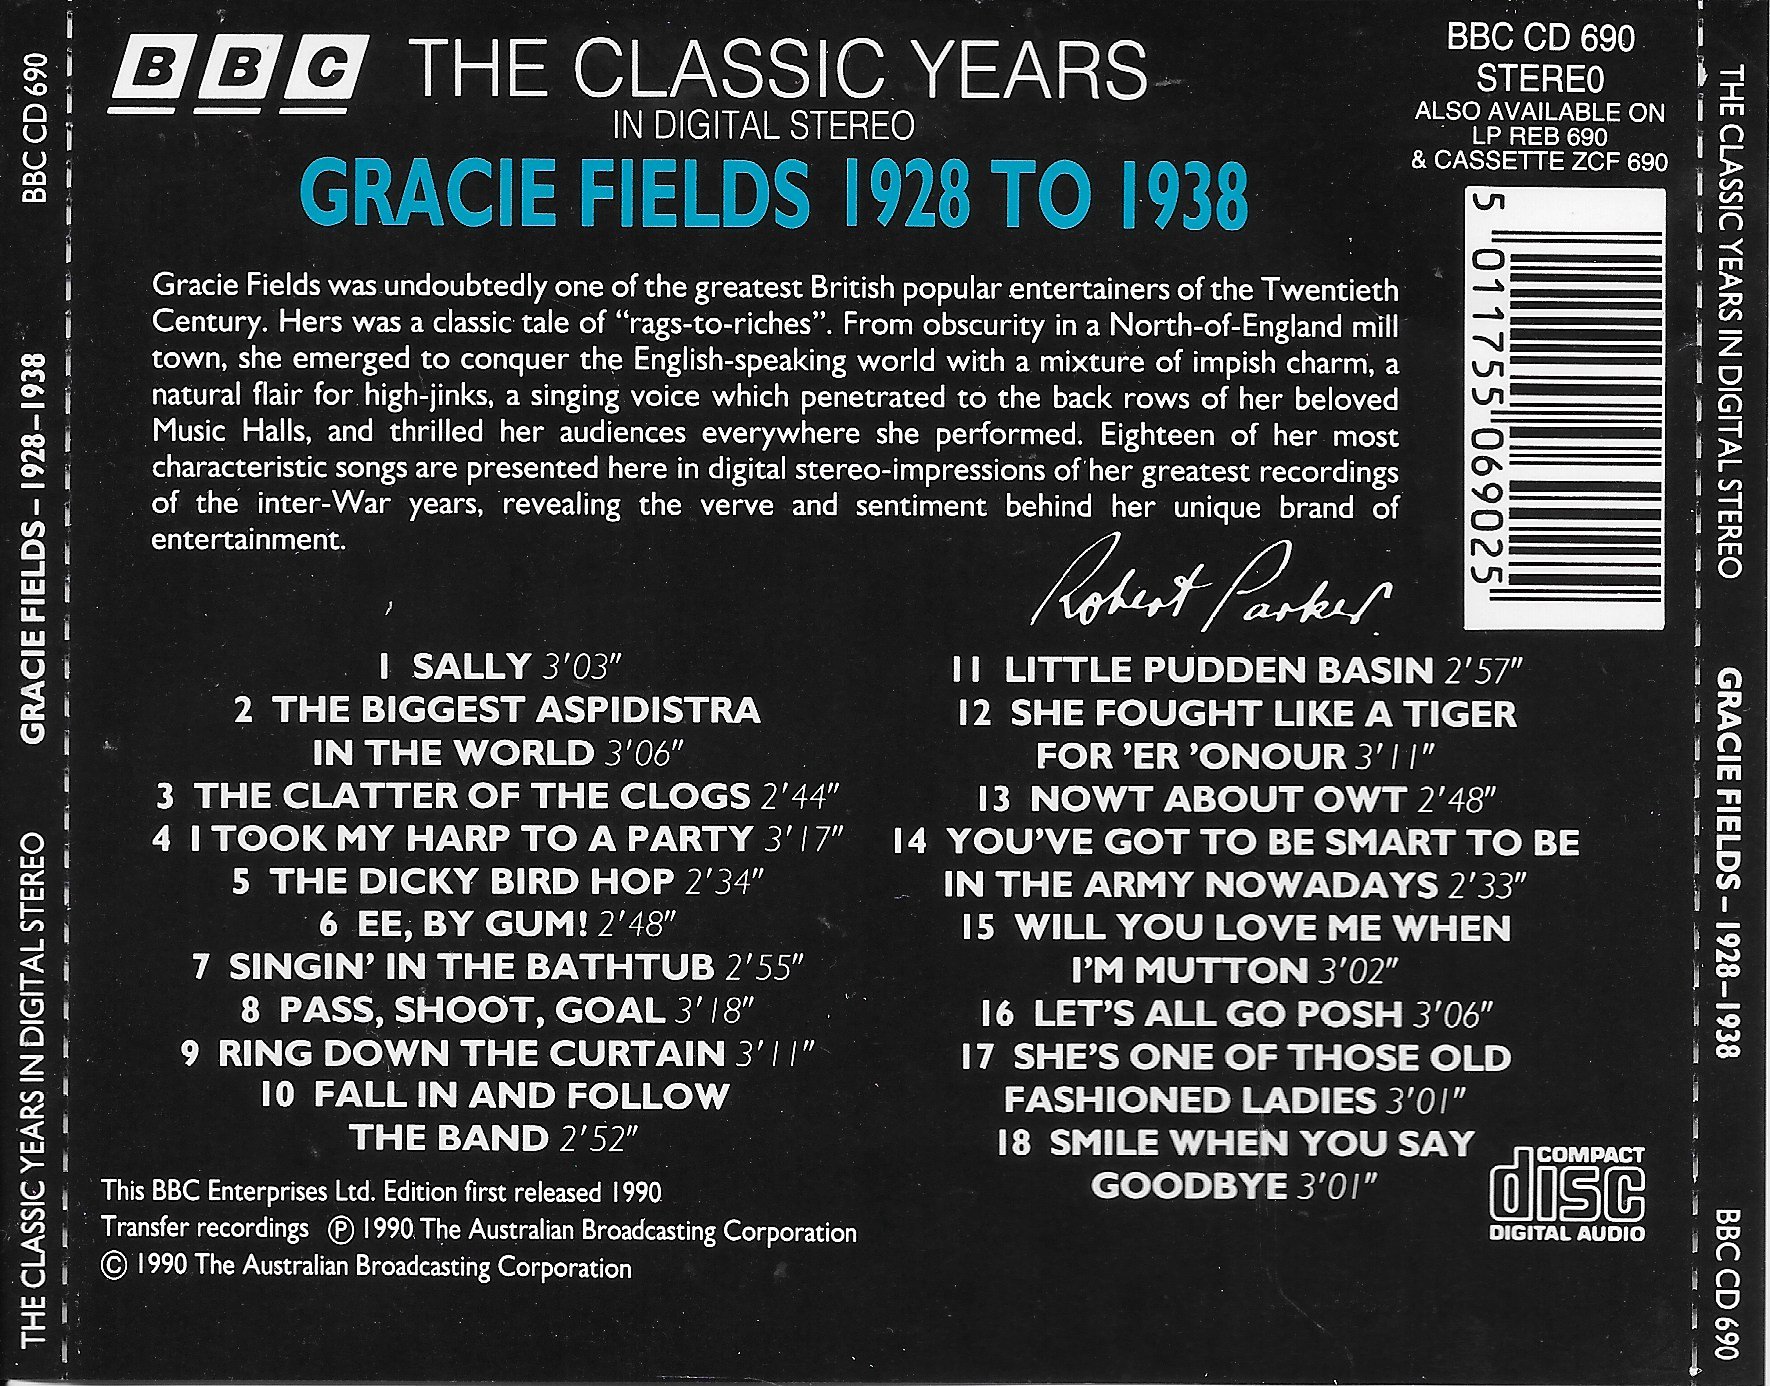 Back cover of BBCCD690